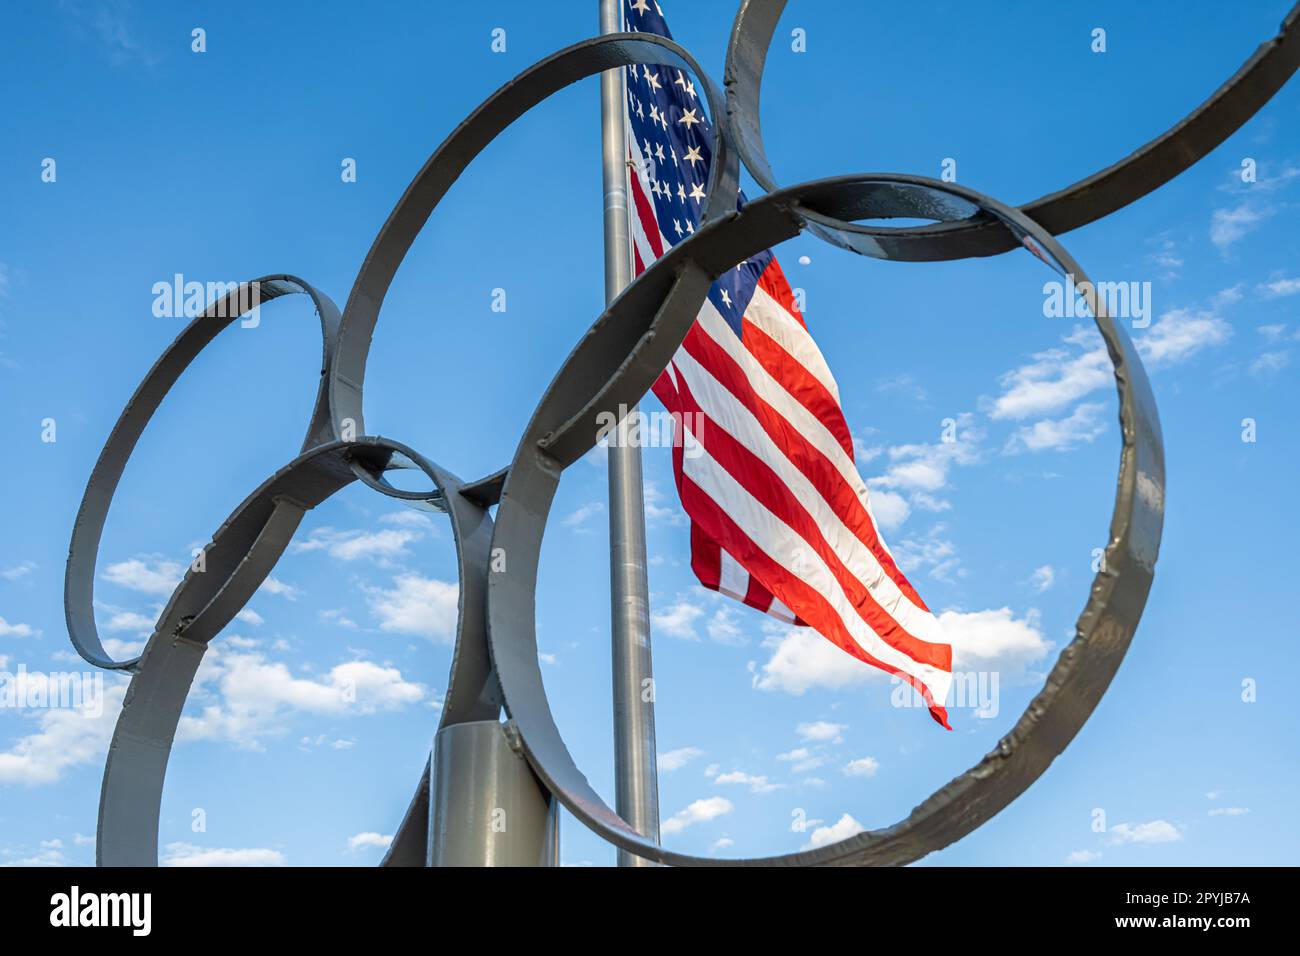 United States flag waving behind the Olympic rings at Lake Lanier Olympic Park, an Olympic Rowing & Canoe/Kayak Competition venue, in Gainesville, GA. Stock Photo